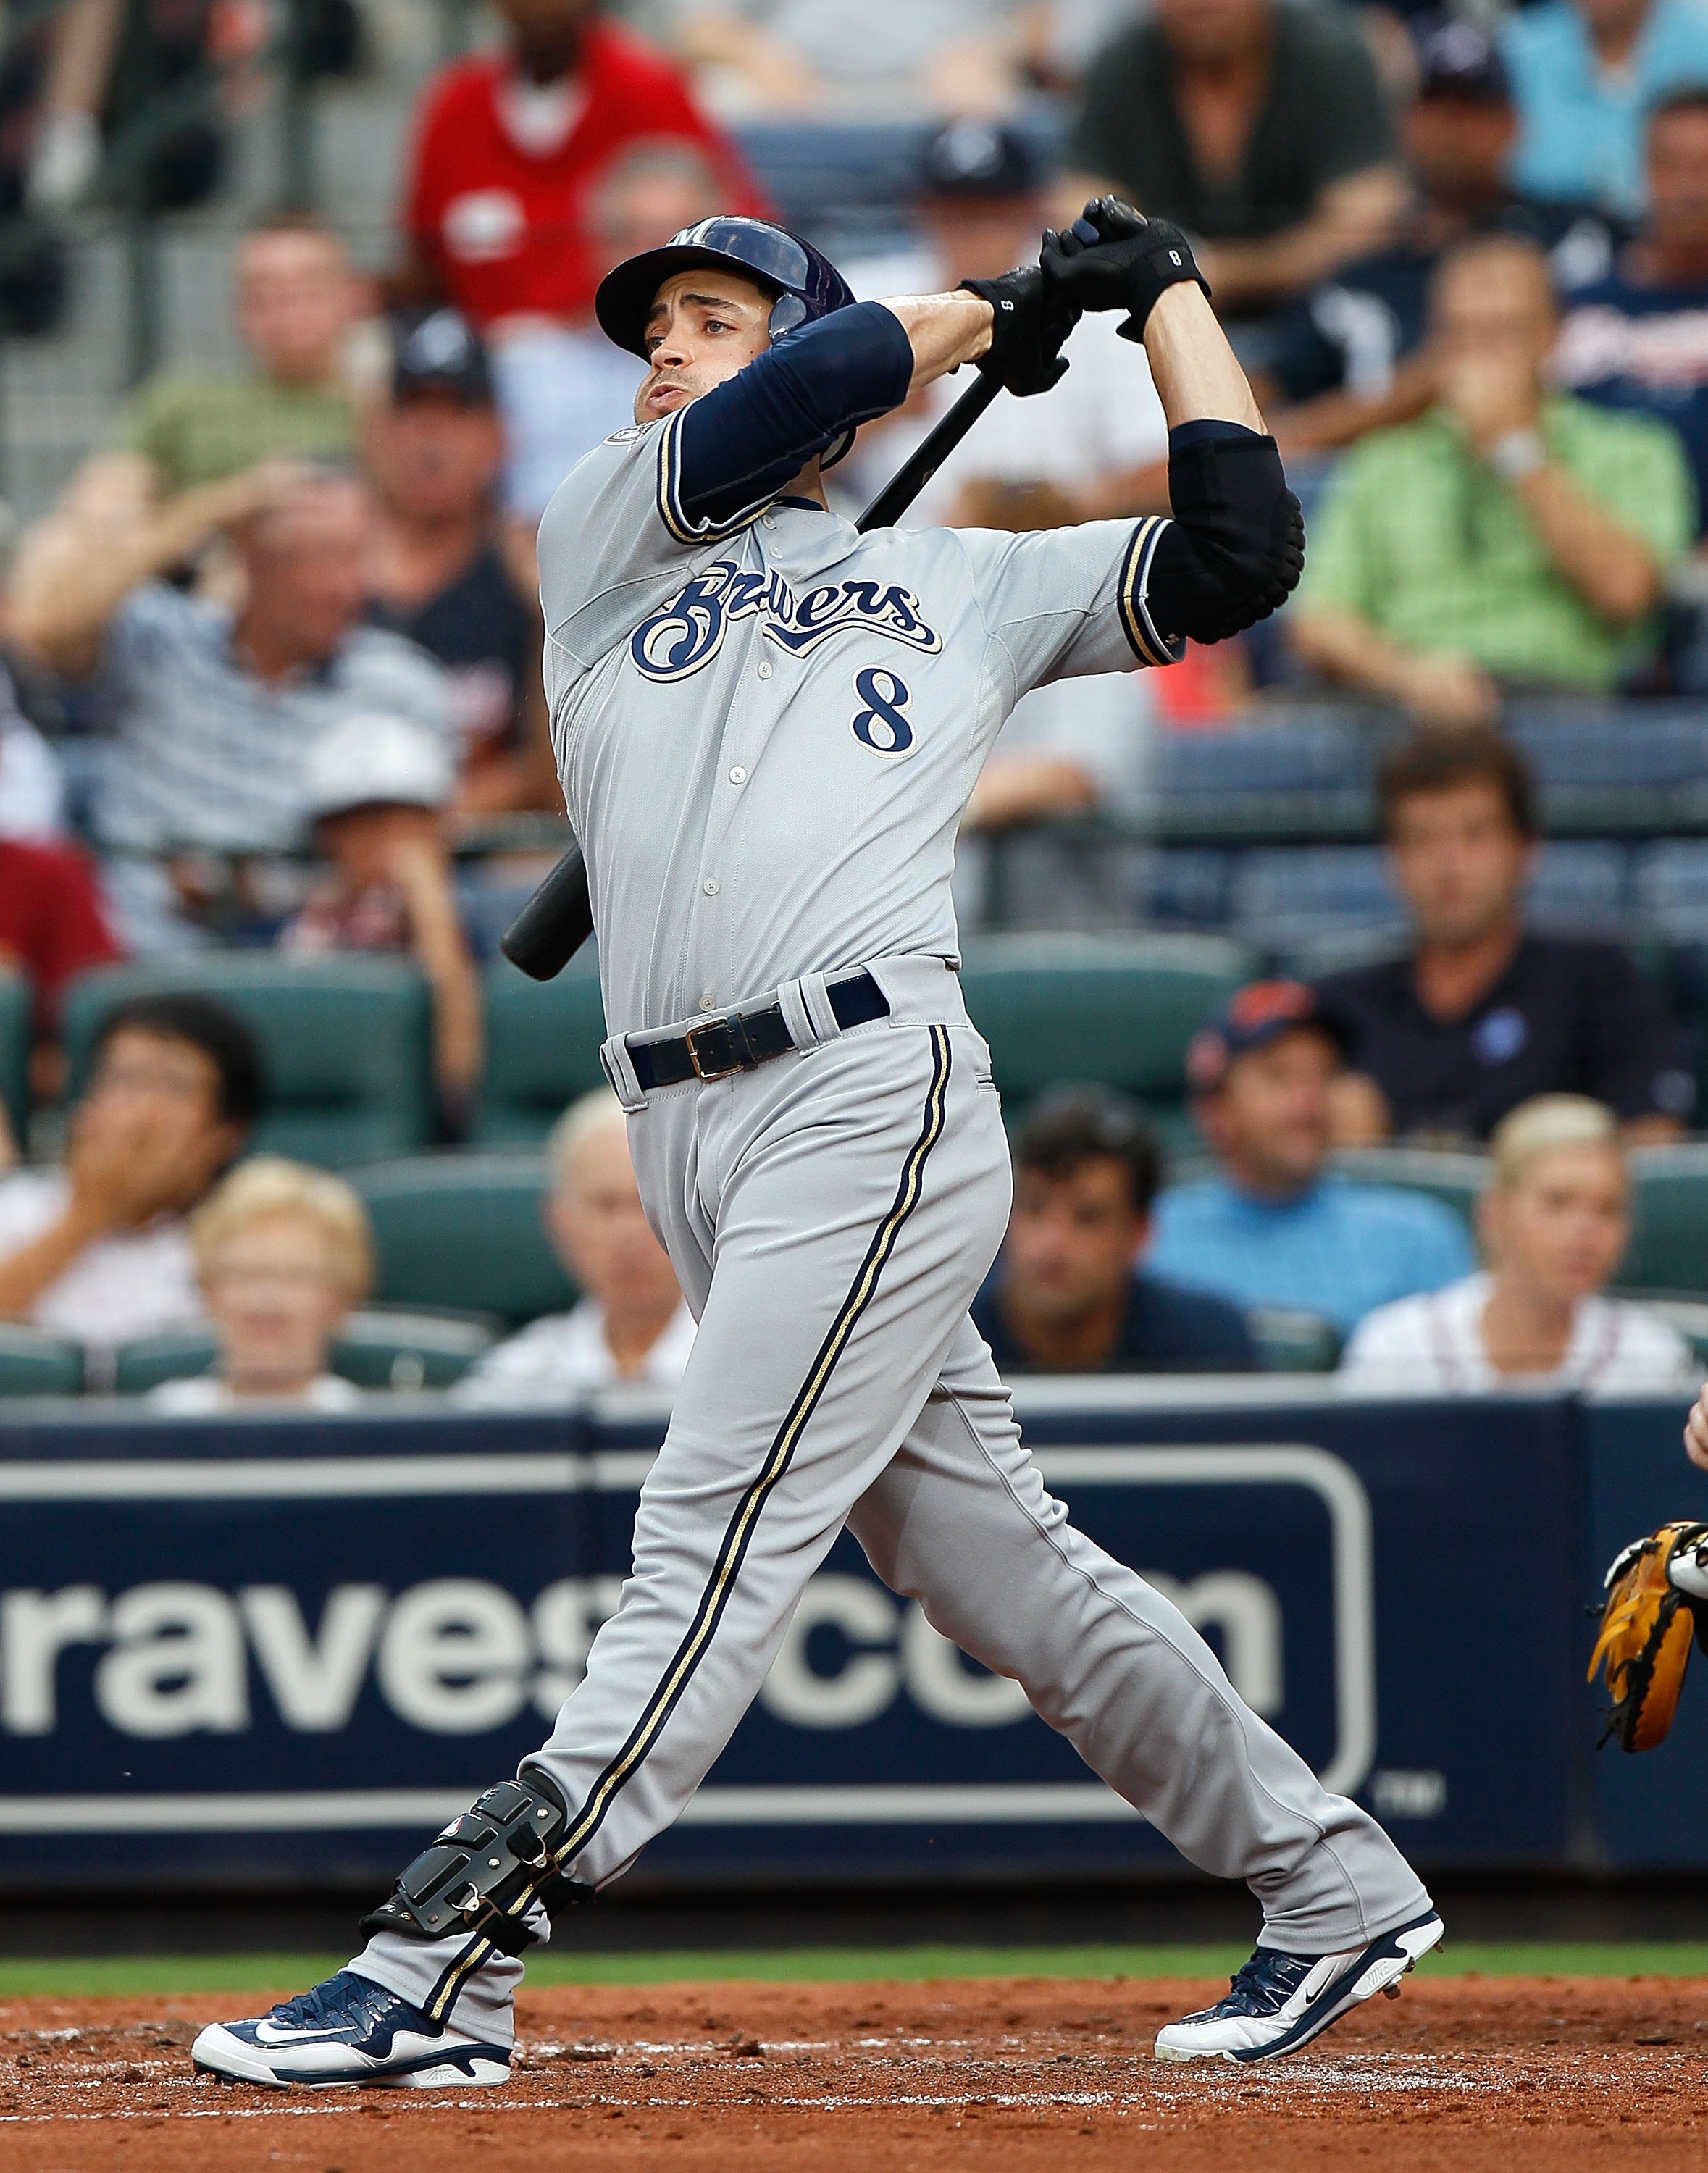 ATLANTA - JULY 15:  Ryan Braun #8 of the Milwaukee Brewers against the Atlanta Braves at Turner Field on July 15, 2010 in Atlanta, Georgia.  (Photo by Kevin C. Cox/Getty Images)